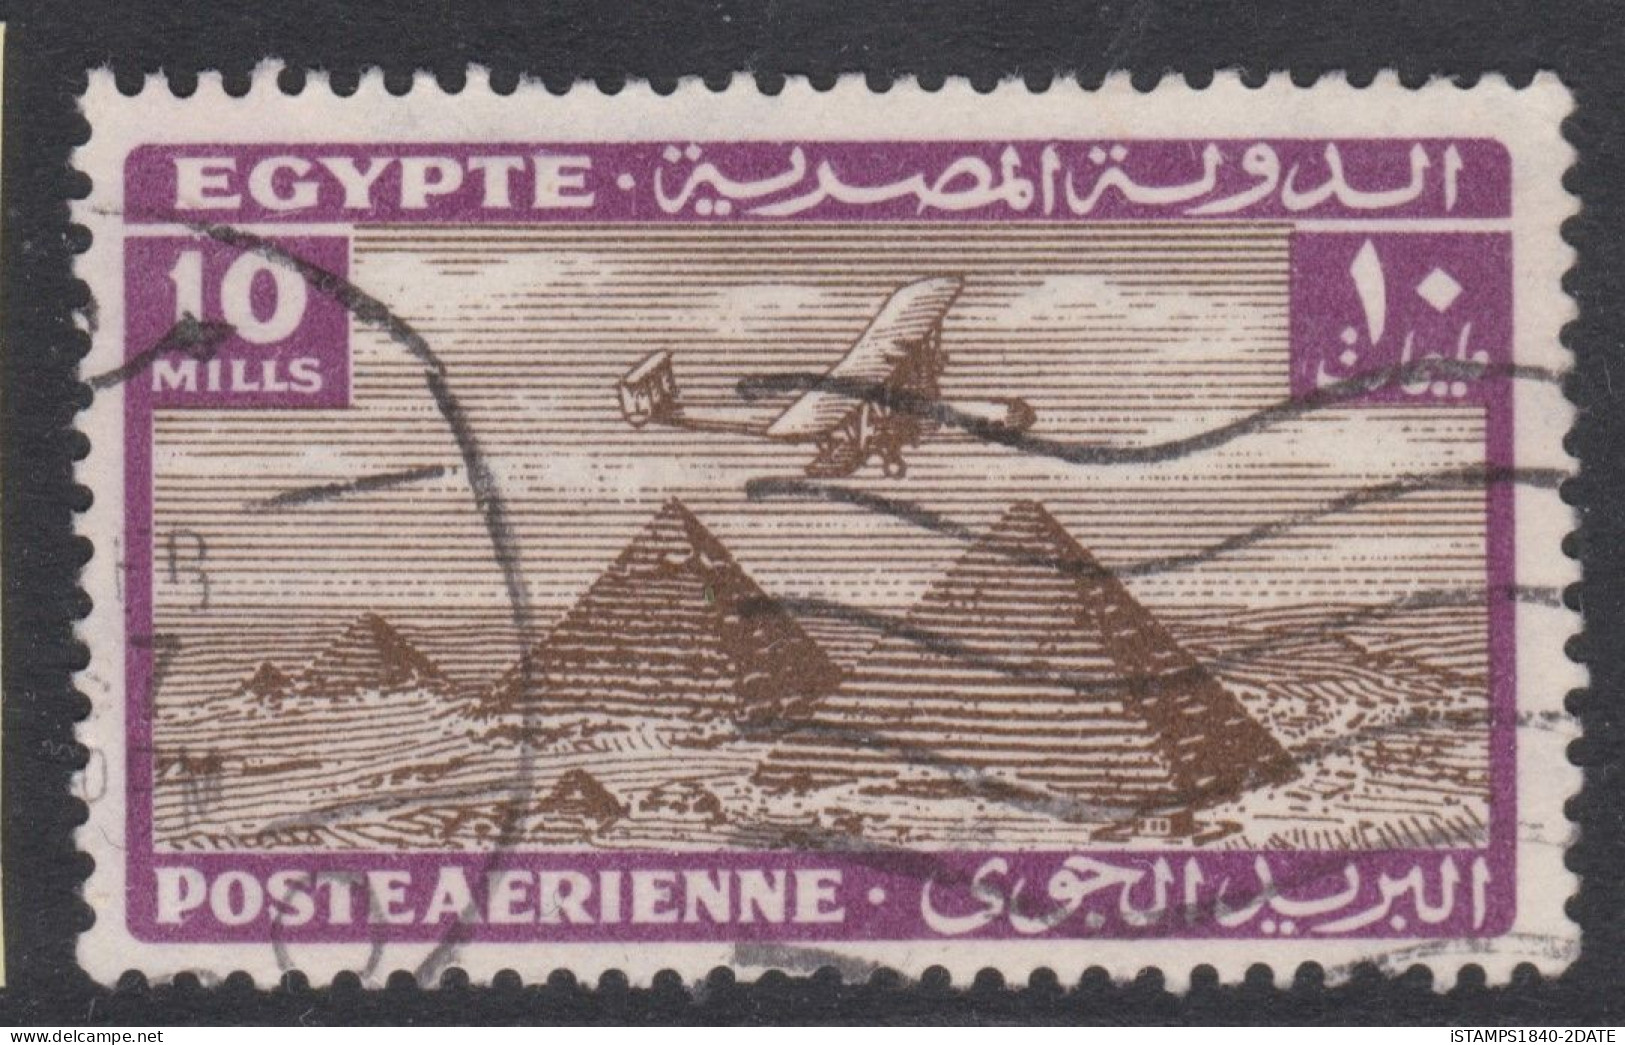 00653/ Egypt 1934/38 Air Mail 10m Used Plane Over Pyramid - Luftpost